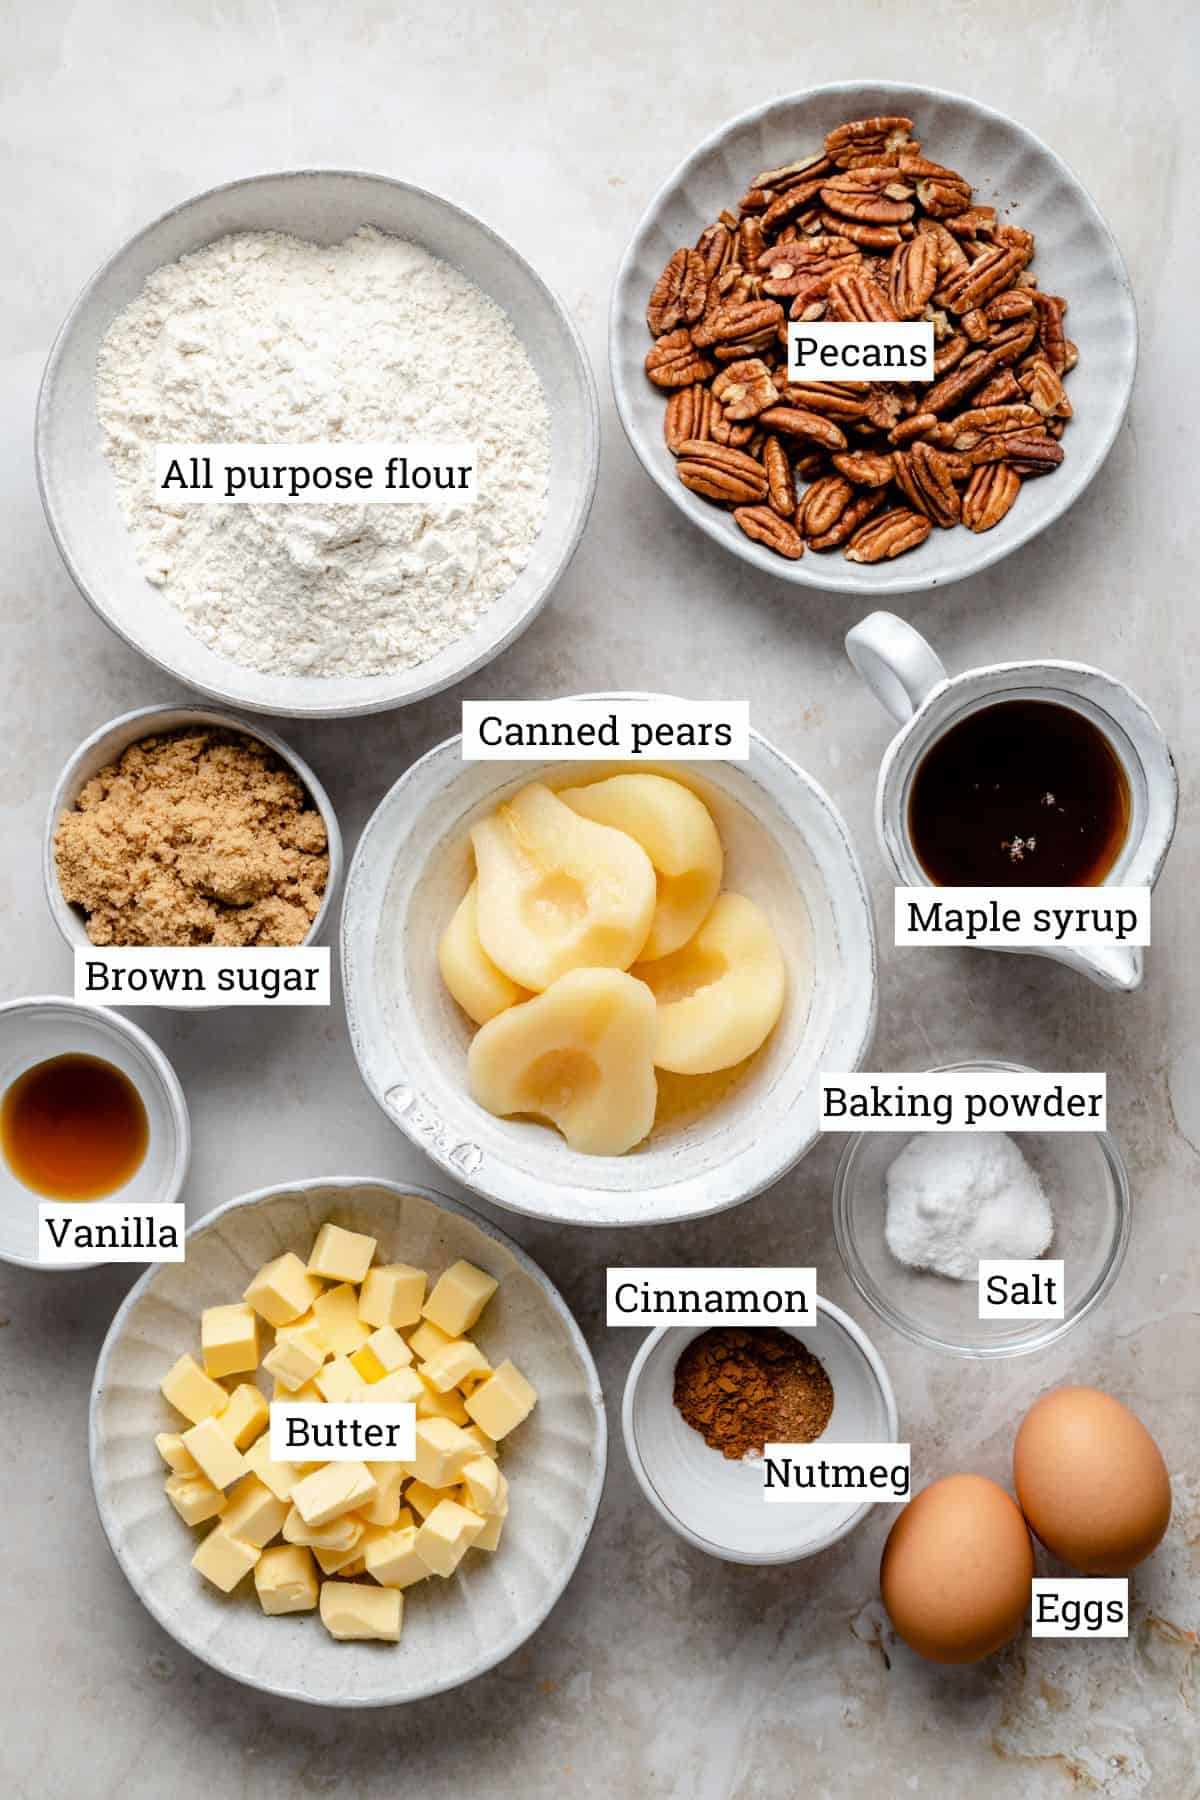 Ingredients in various bowls on a work surface with labels.